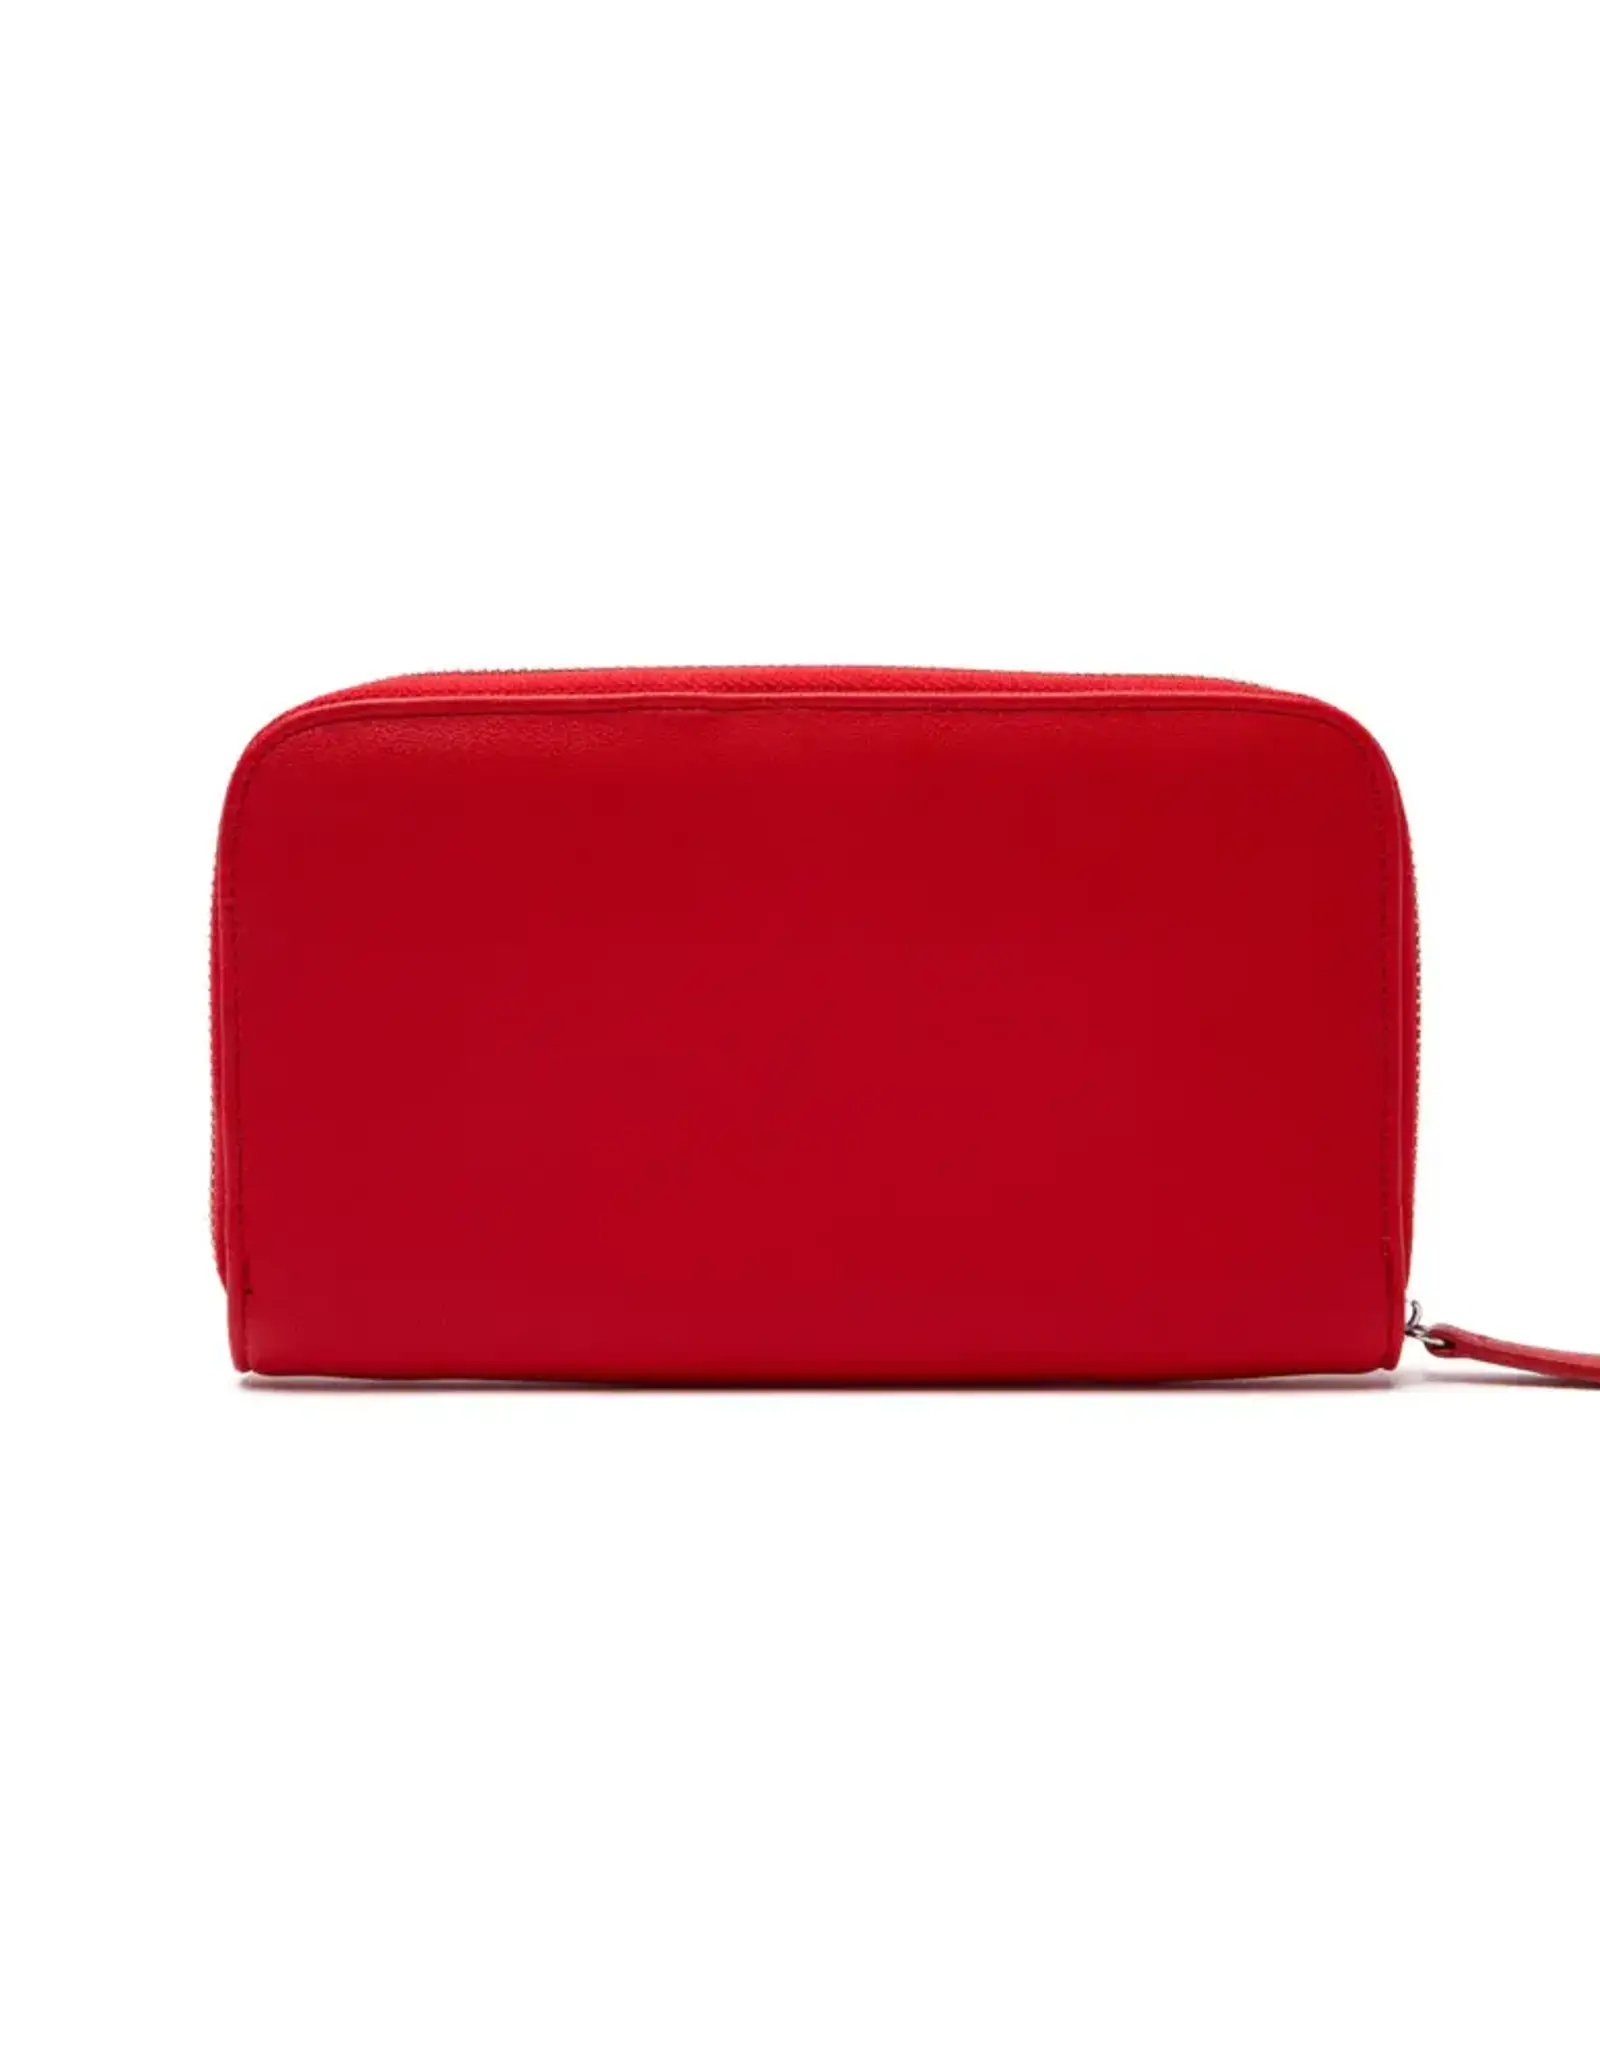 Brouk & Co Red Luna Travel Jewelry Wallet